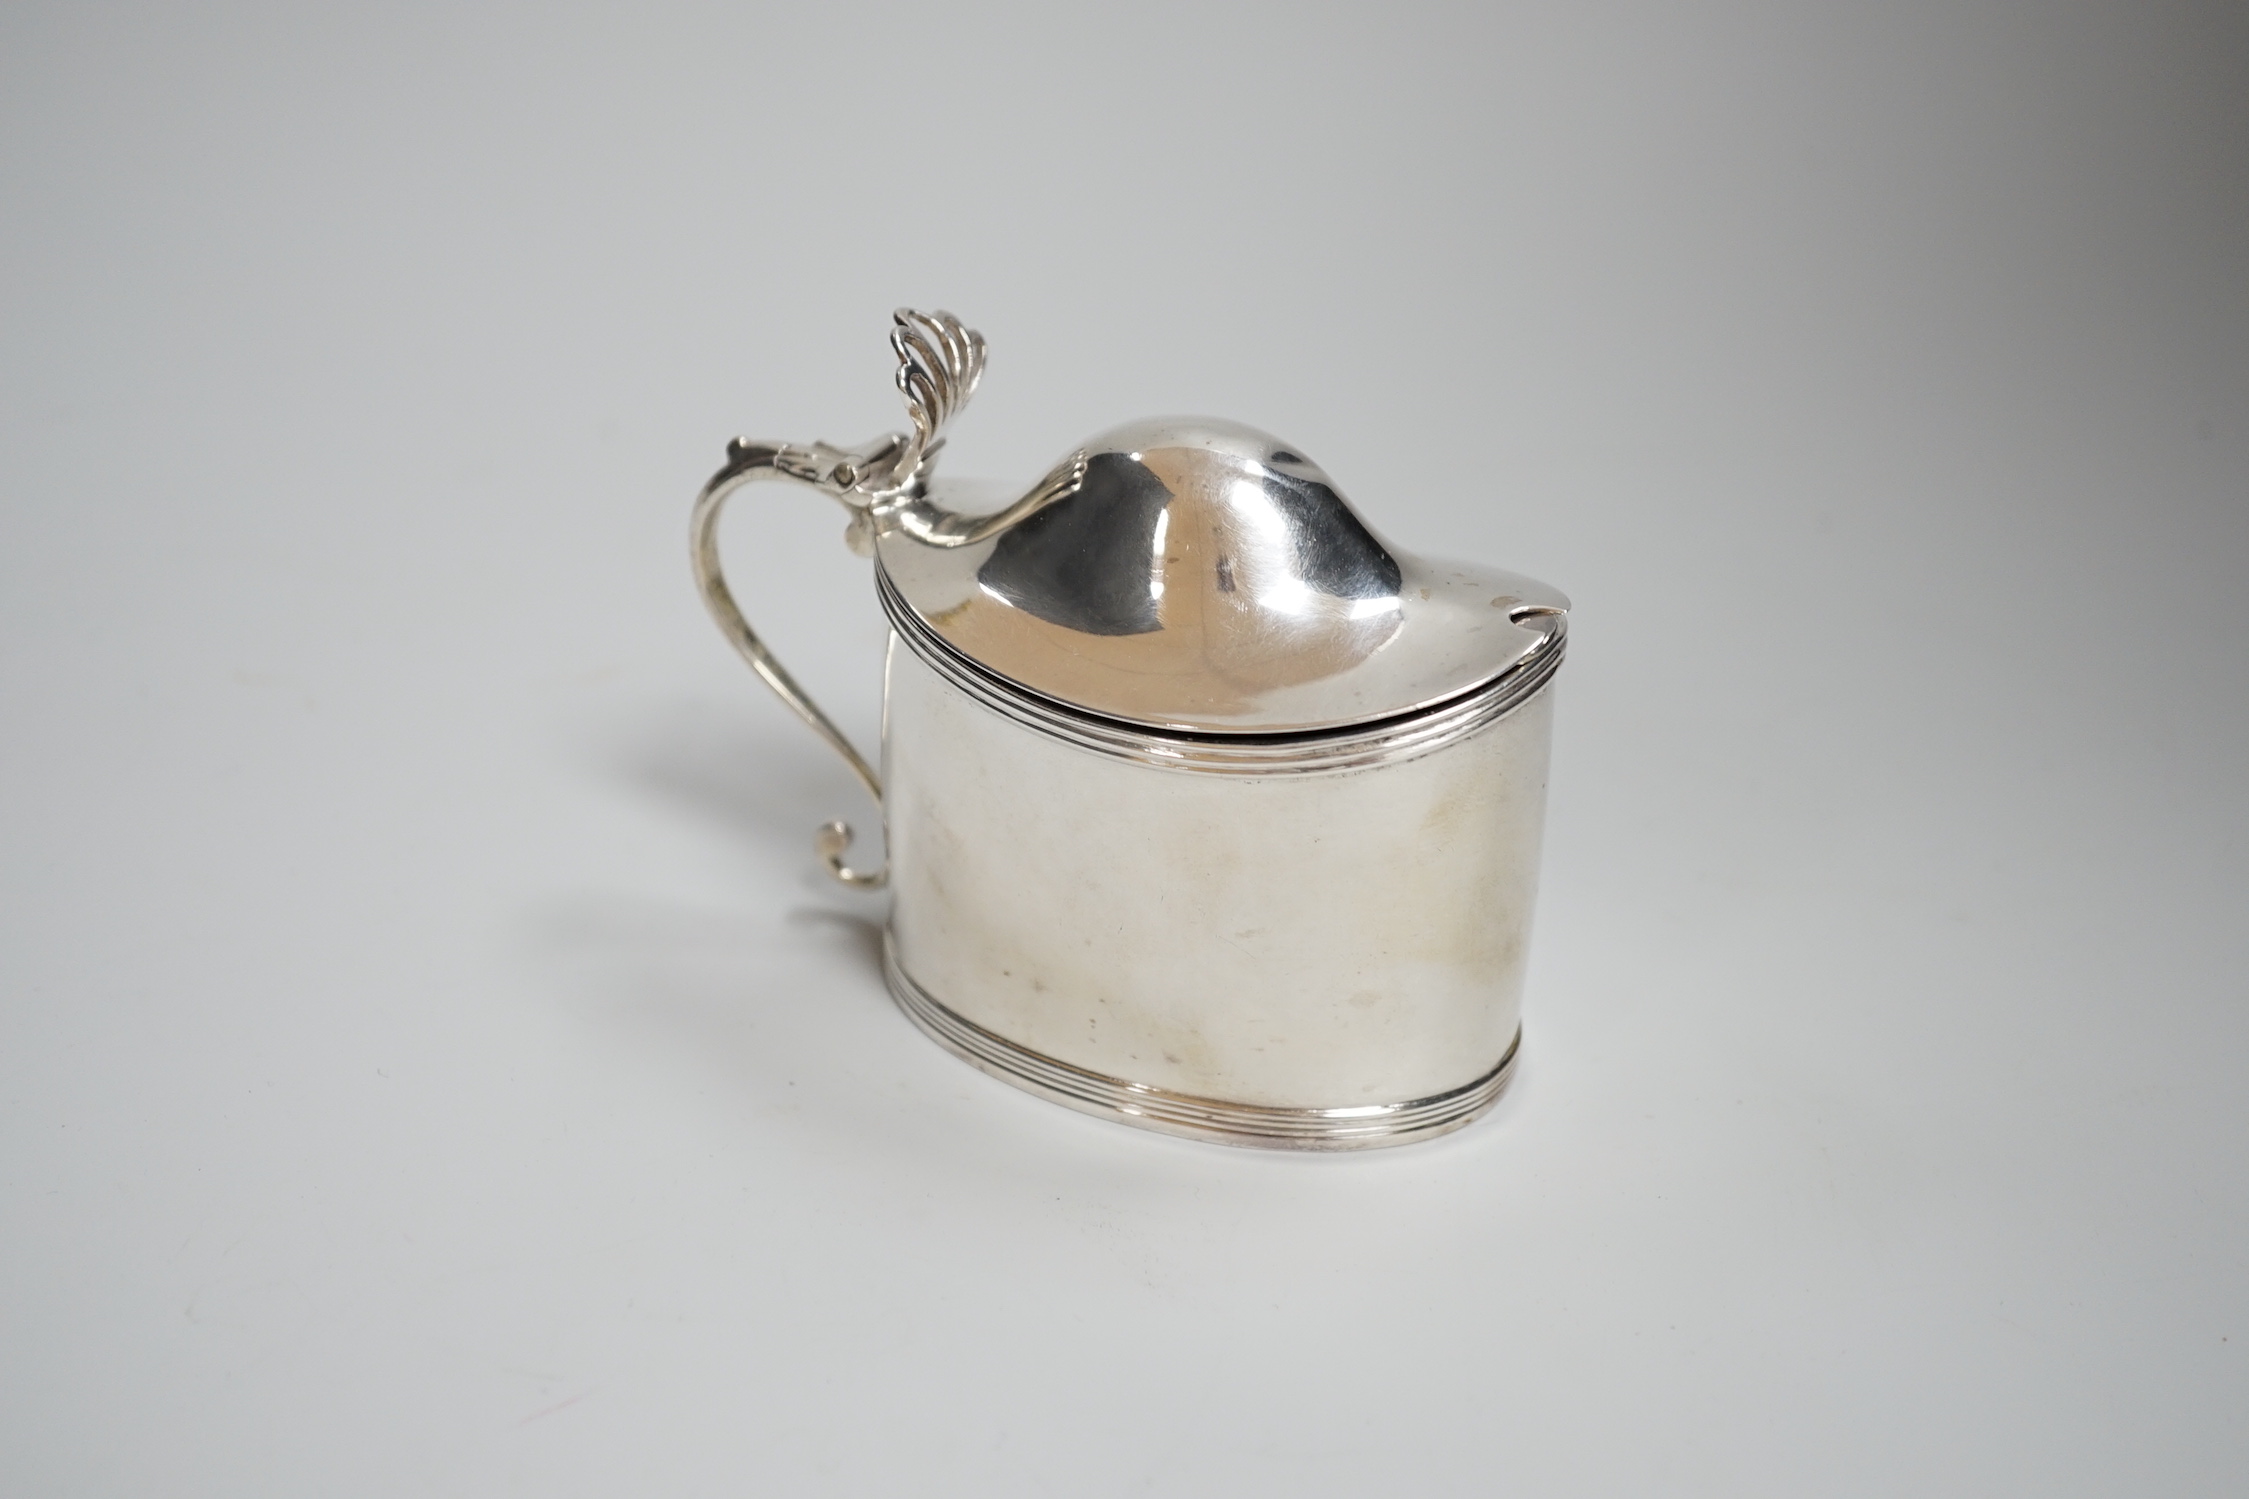 A George III oval silver drum mustard, with domed cover, glass liner and plated spoon, makers Peter, Anne and William Bateman, London 1800, 121 grams